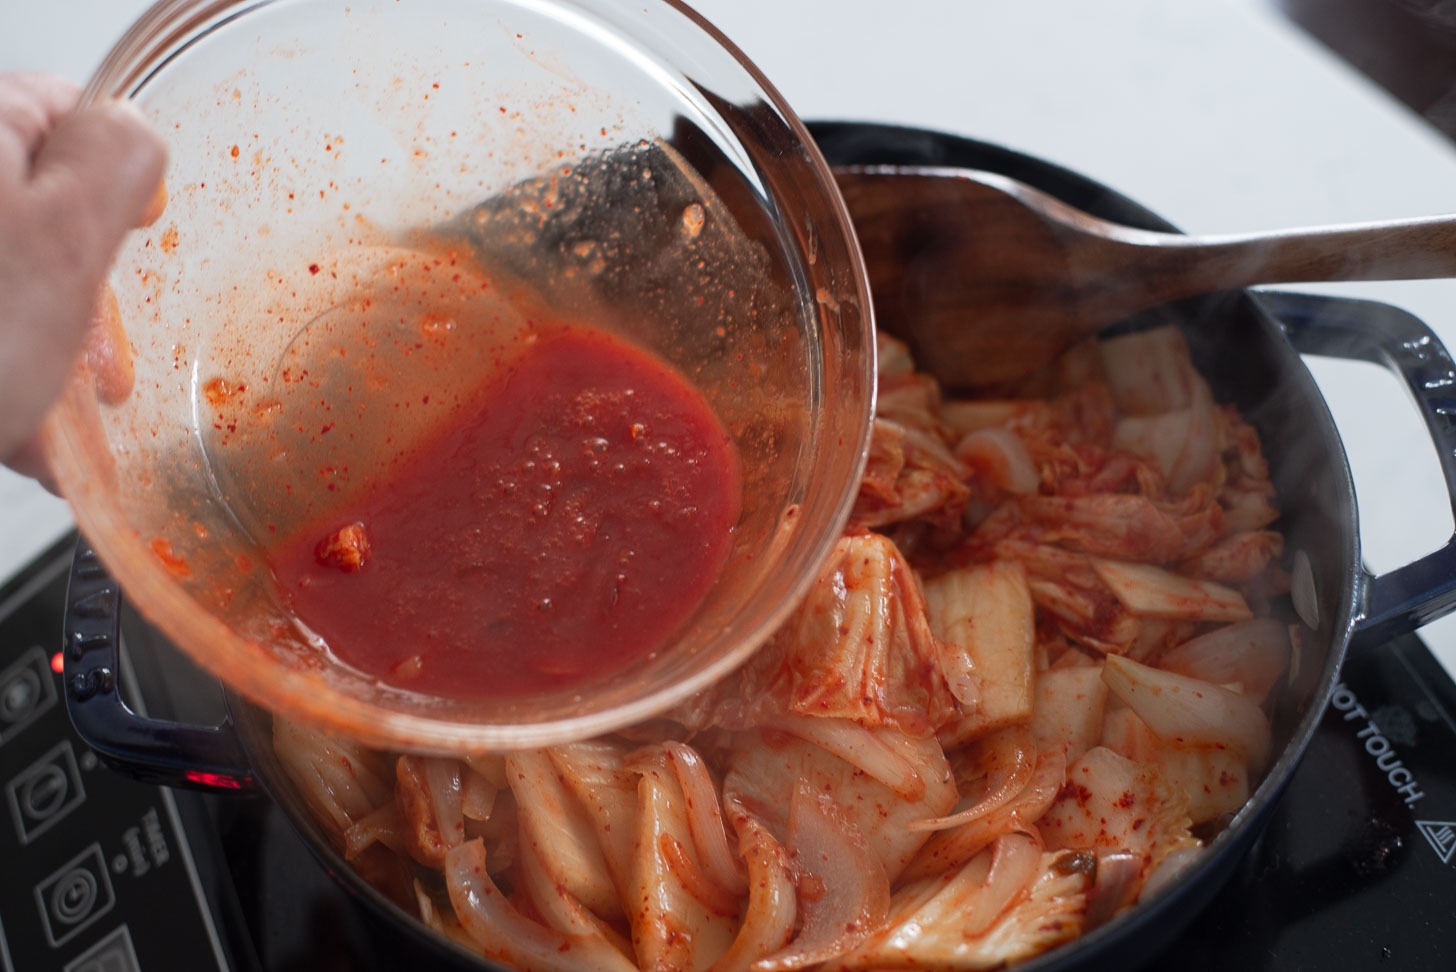 Kimchi juice is added to kimchi and onion mixture in the pot.